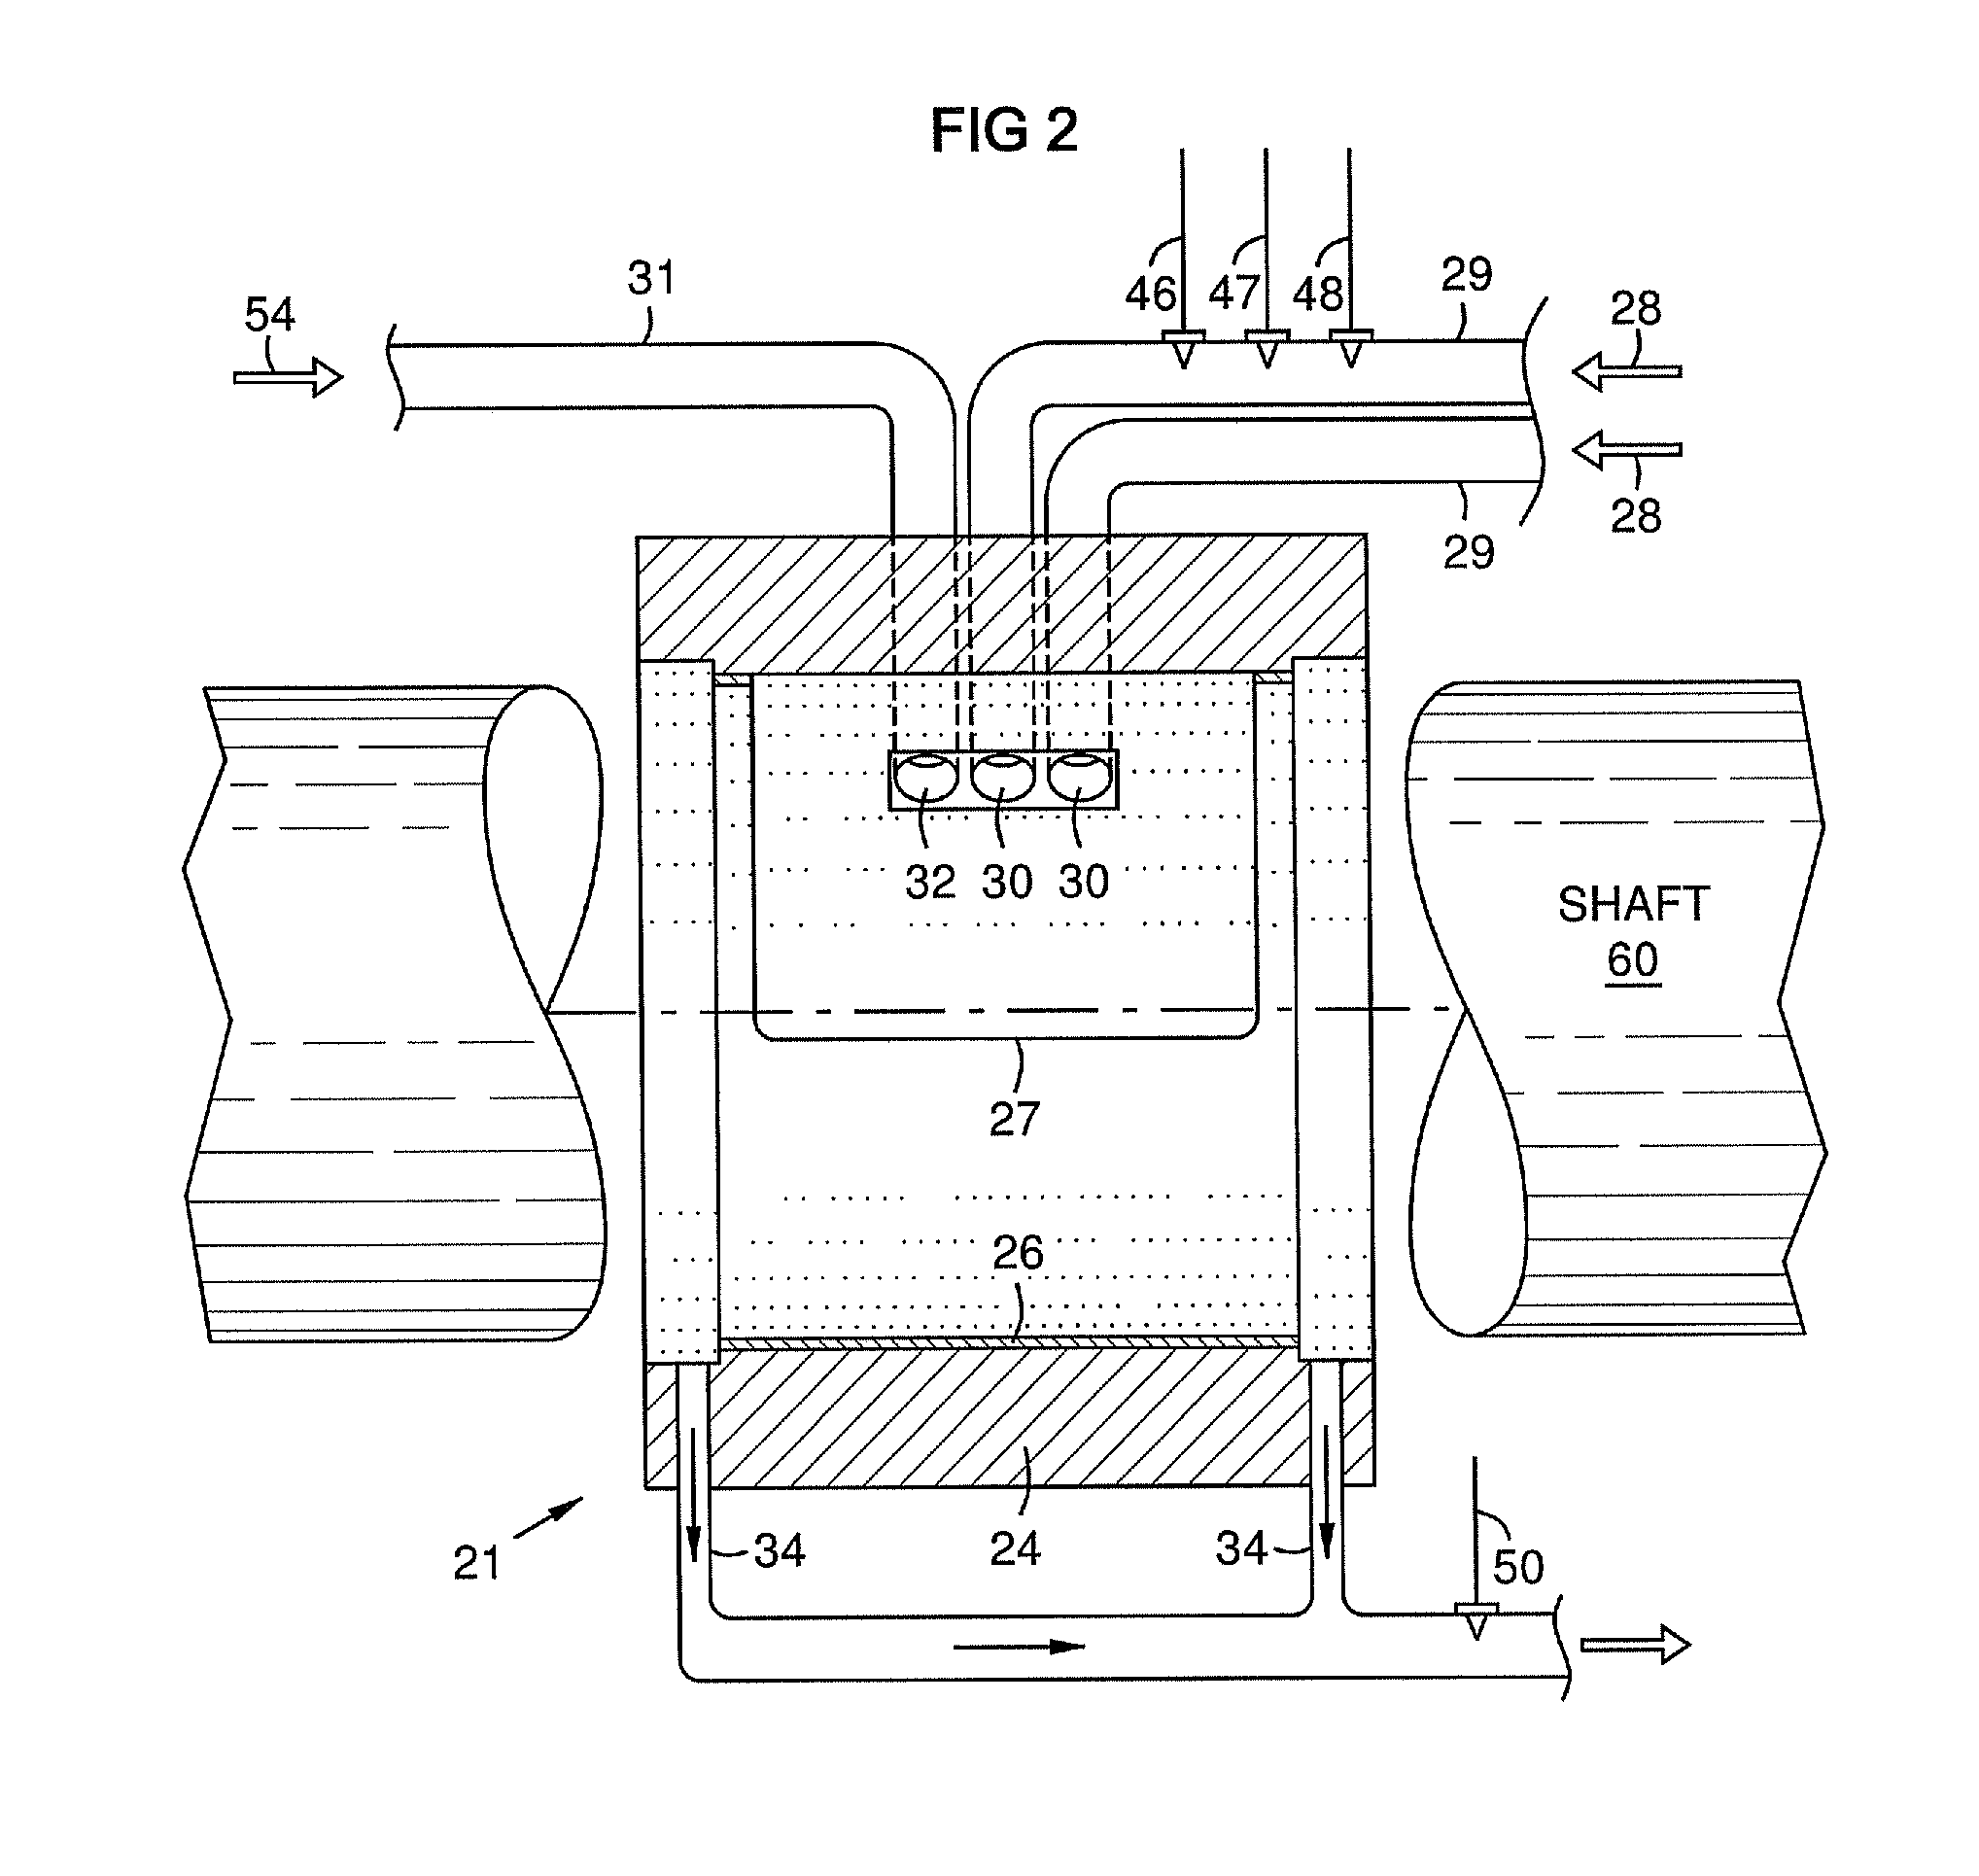 Backup Lubrication System For A Rotor Bearing